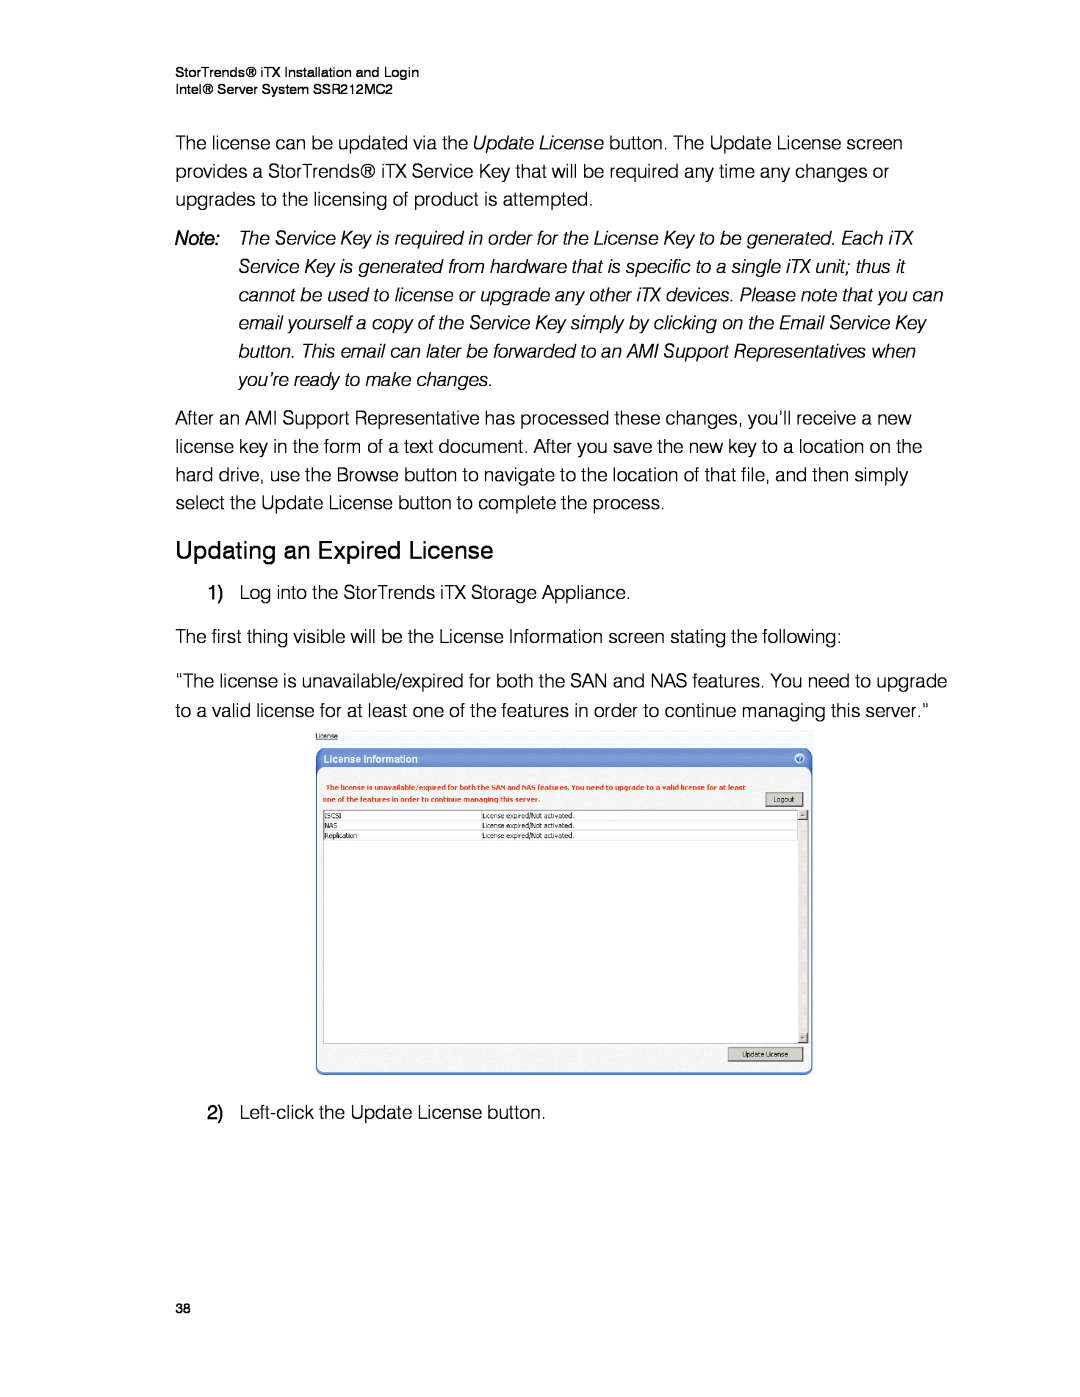 Intel SSR212MC2 manual Updating an Expired License 